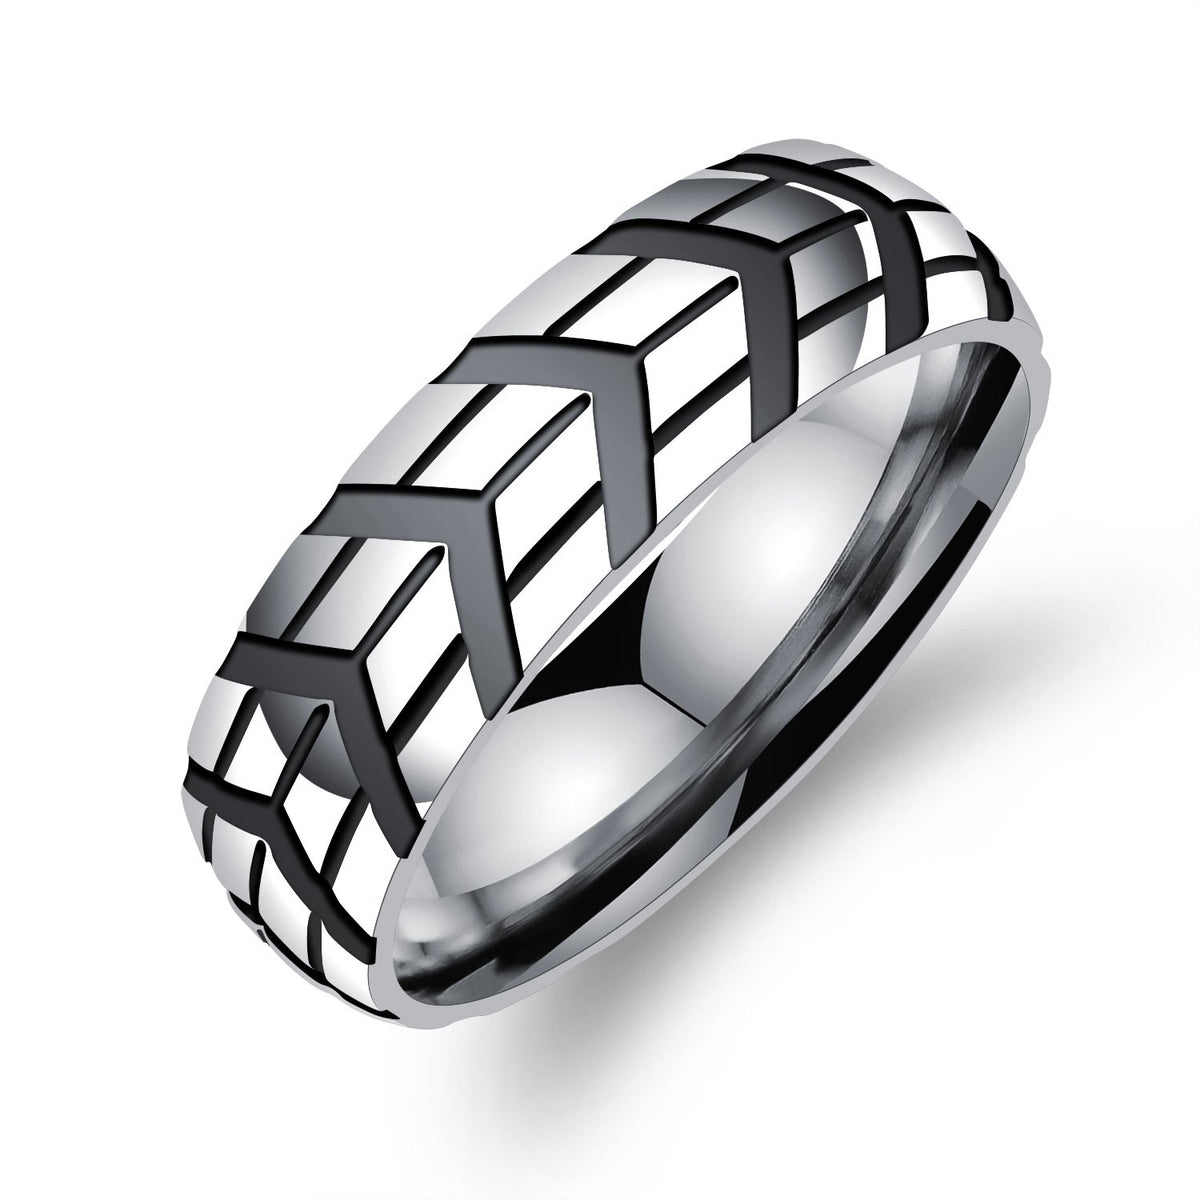 Yellow Chimes Rings for Men Western Style Silver toned Stainless Steel band designed Contemporary Ring for Men and Boys